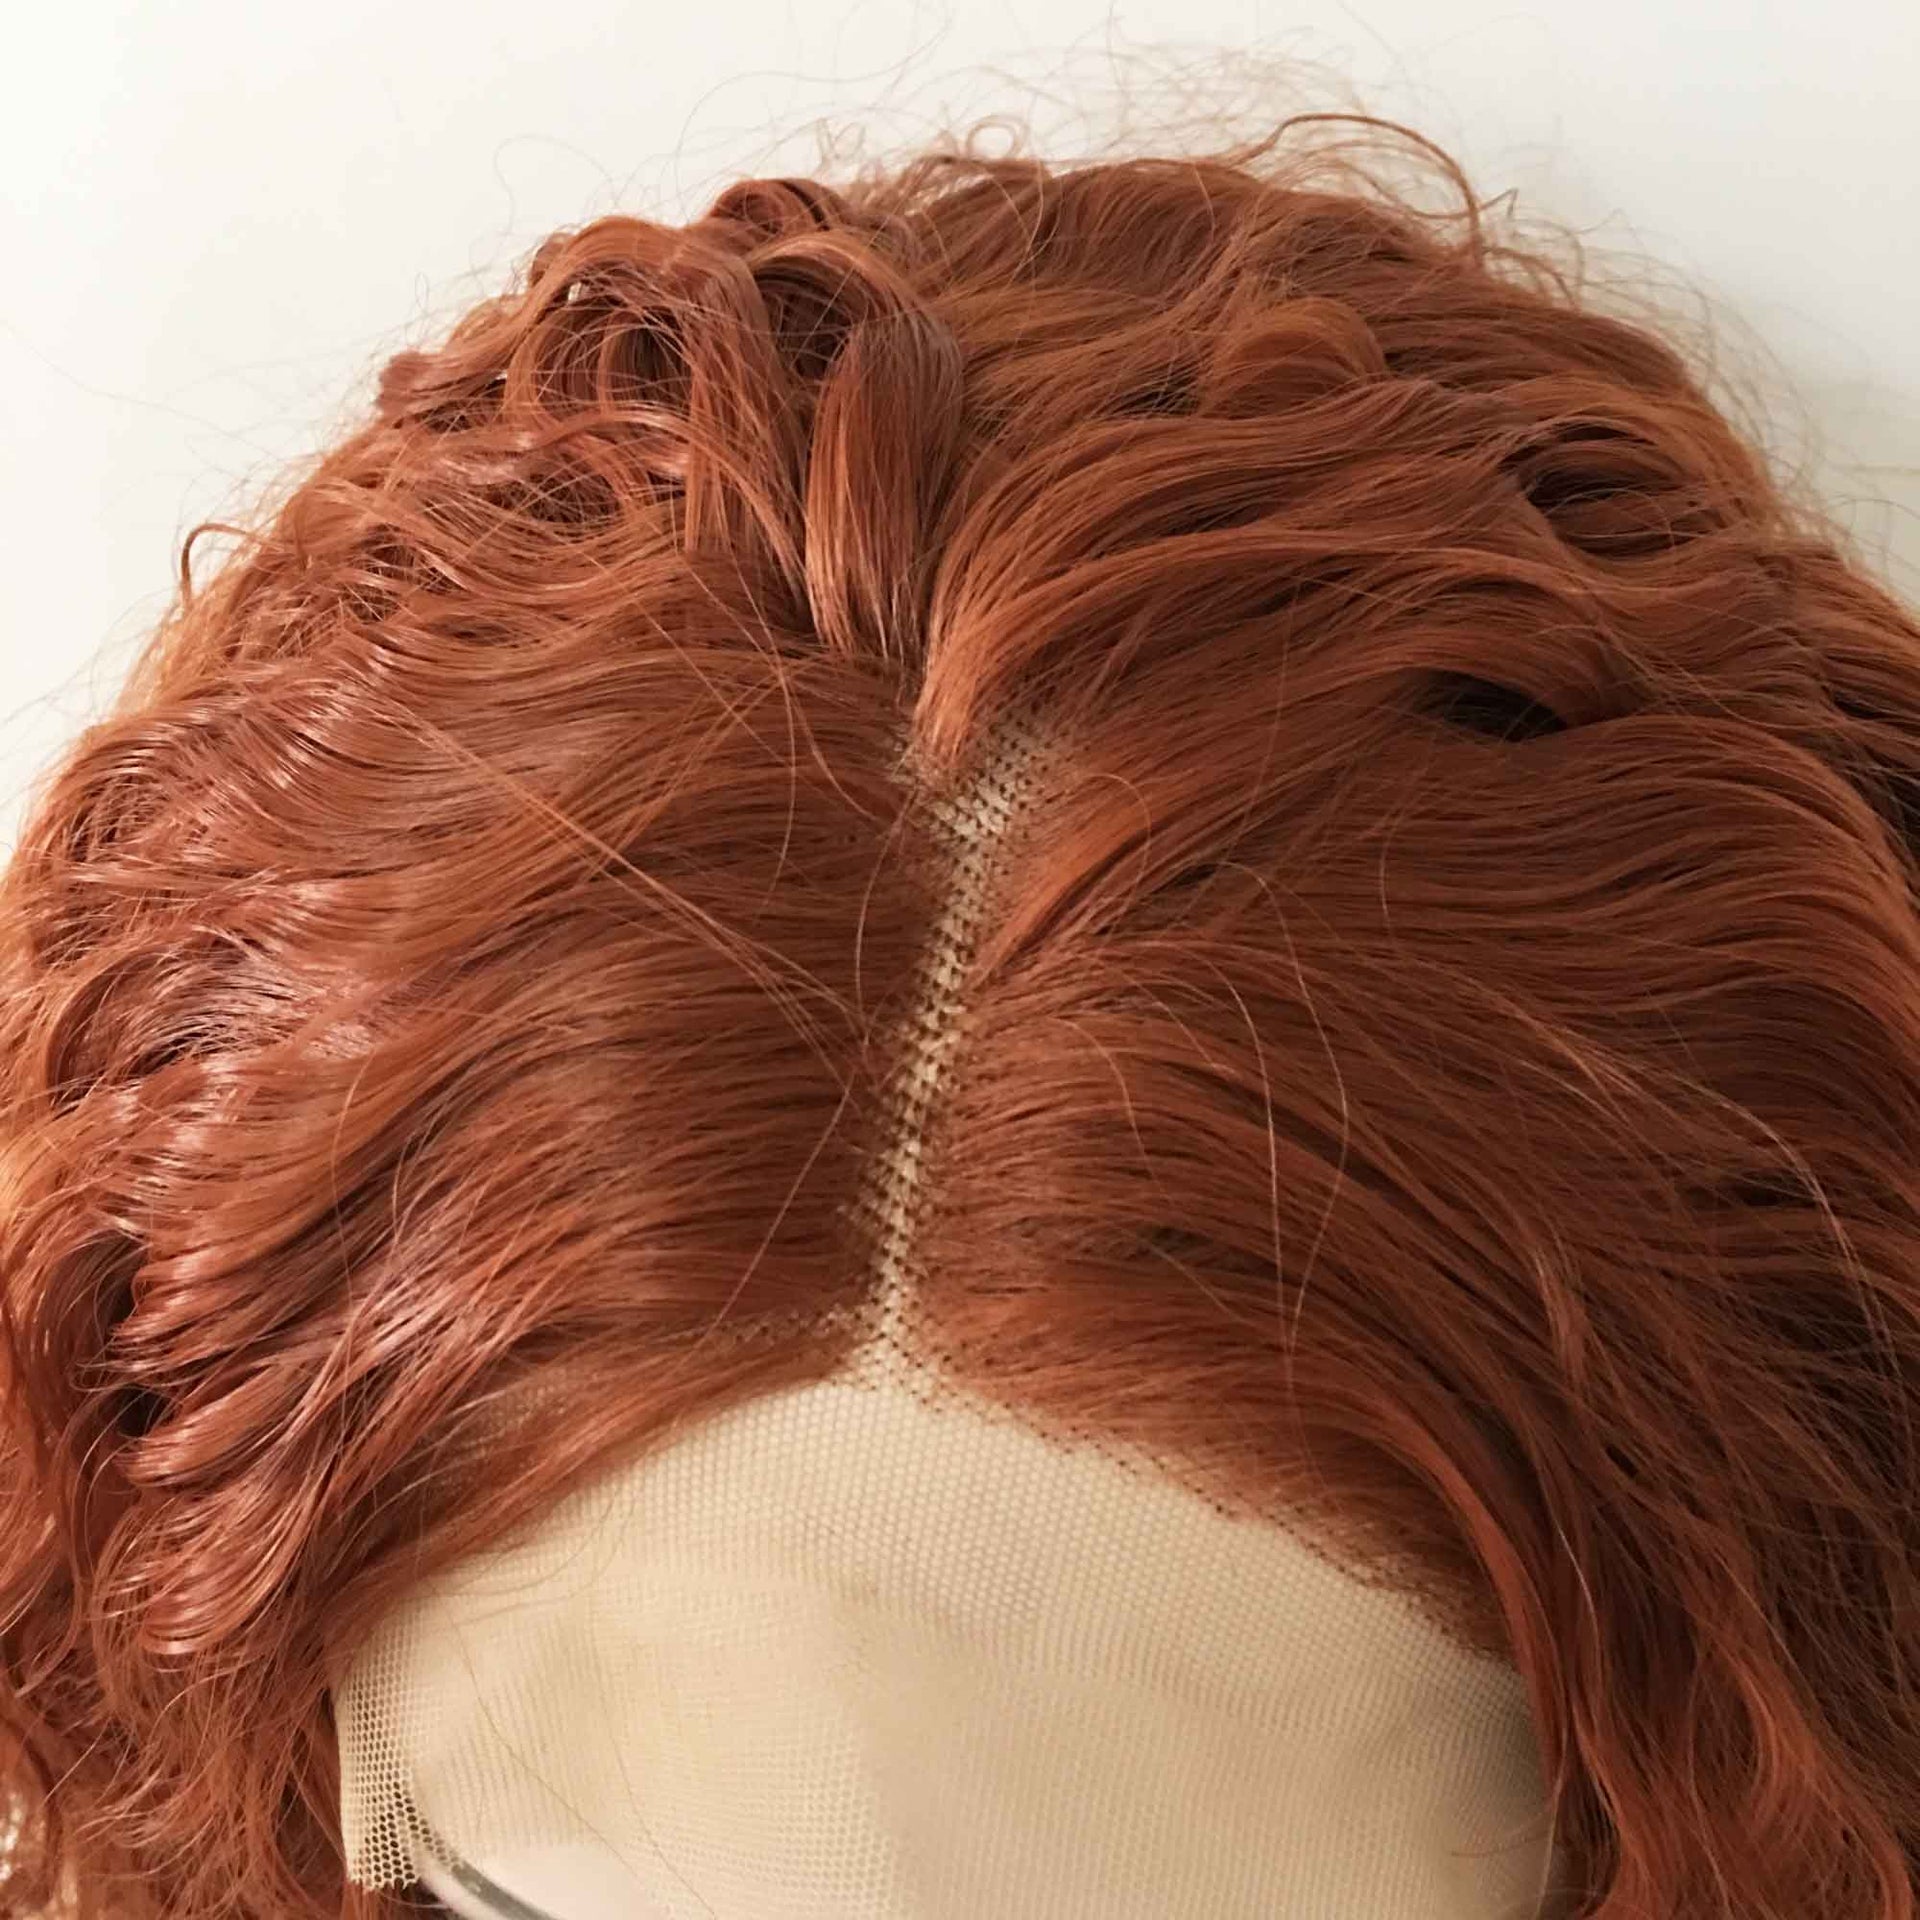 nevermindyrhead Women Auburn Brown Lace Front Middle Part Messy Curly Thick Hair Wig